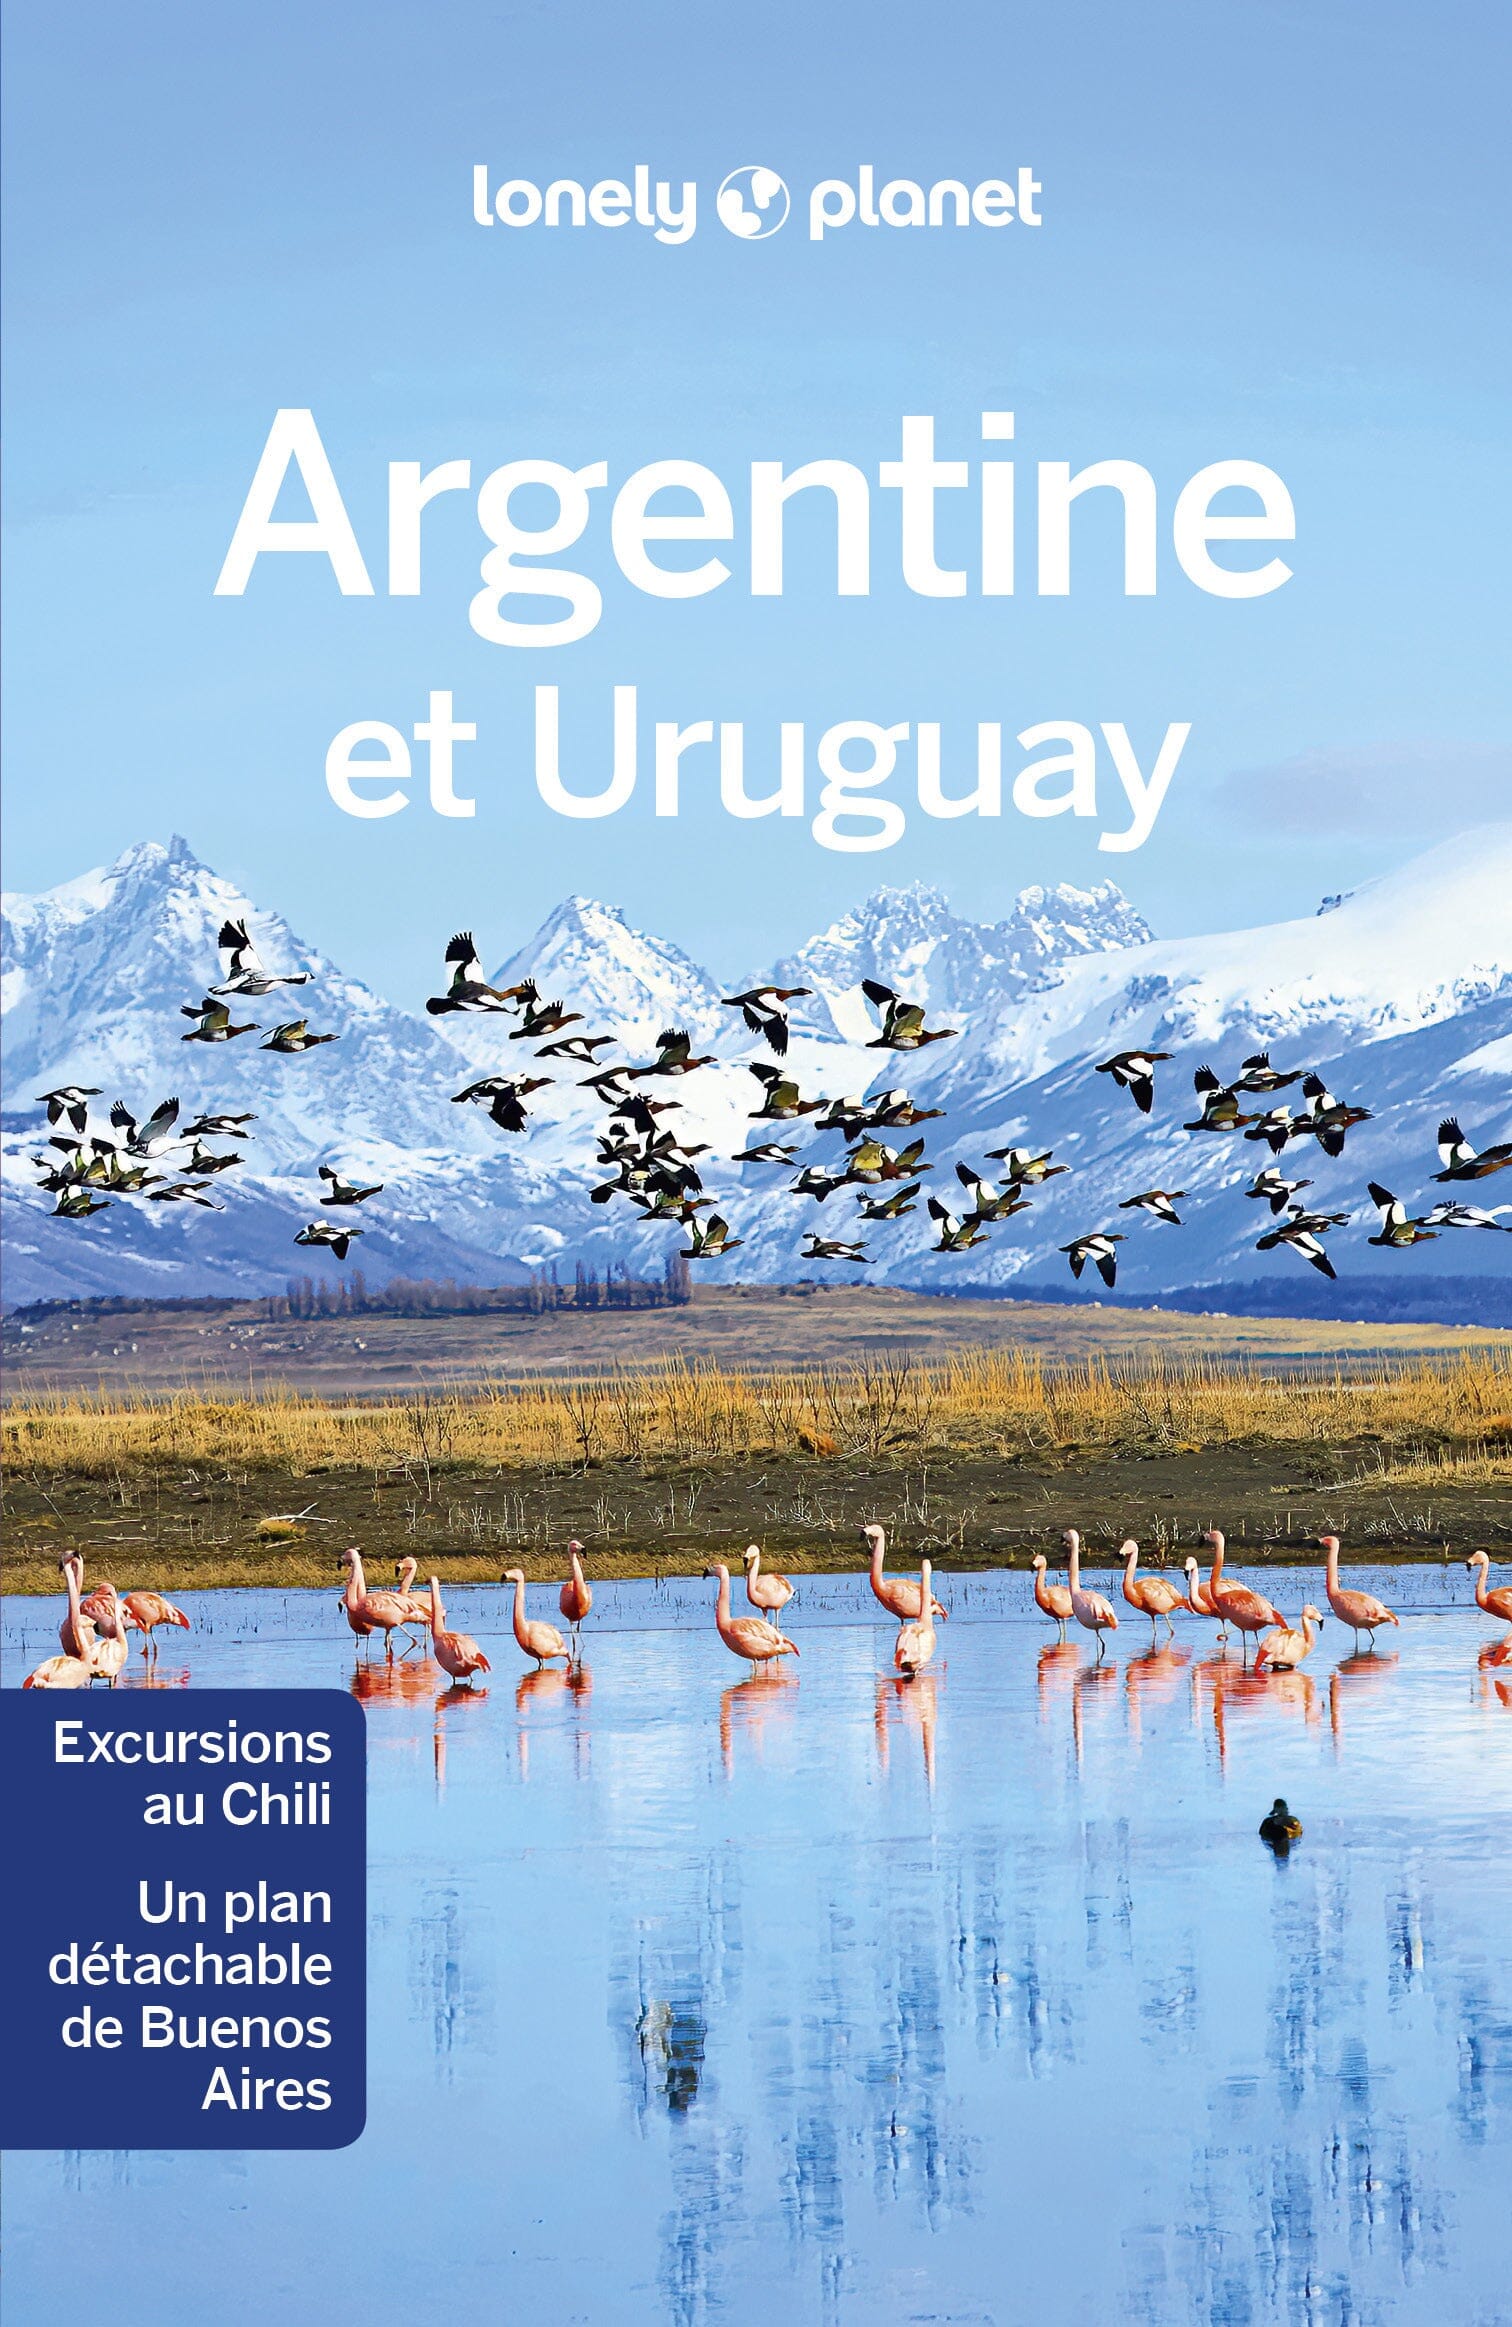 Planet　Travel　(French)　Travel　MapsCompany　Guide　–　Lonely　Argentina　Uruguay　maps　and　hiking